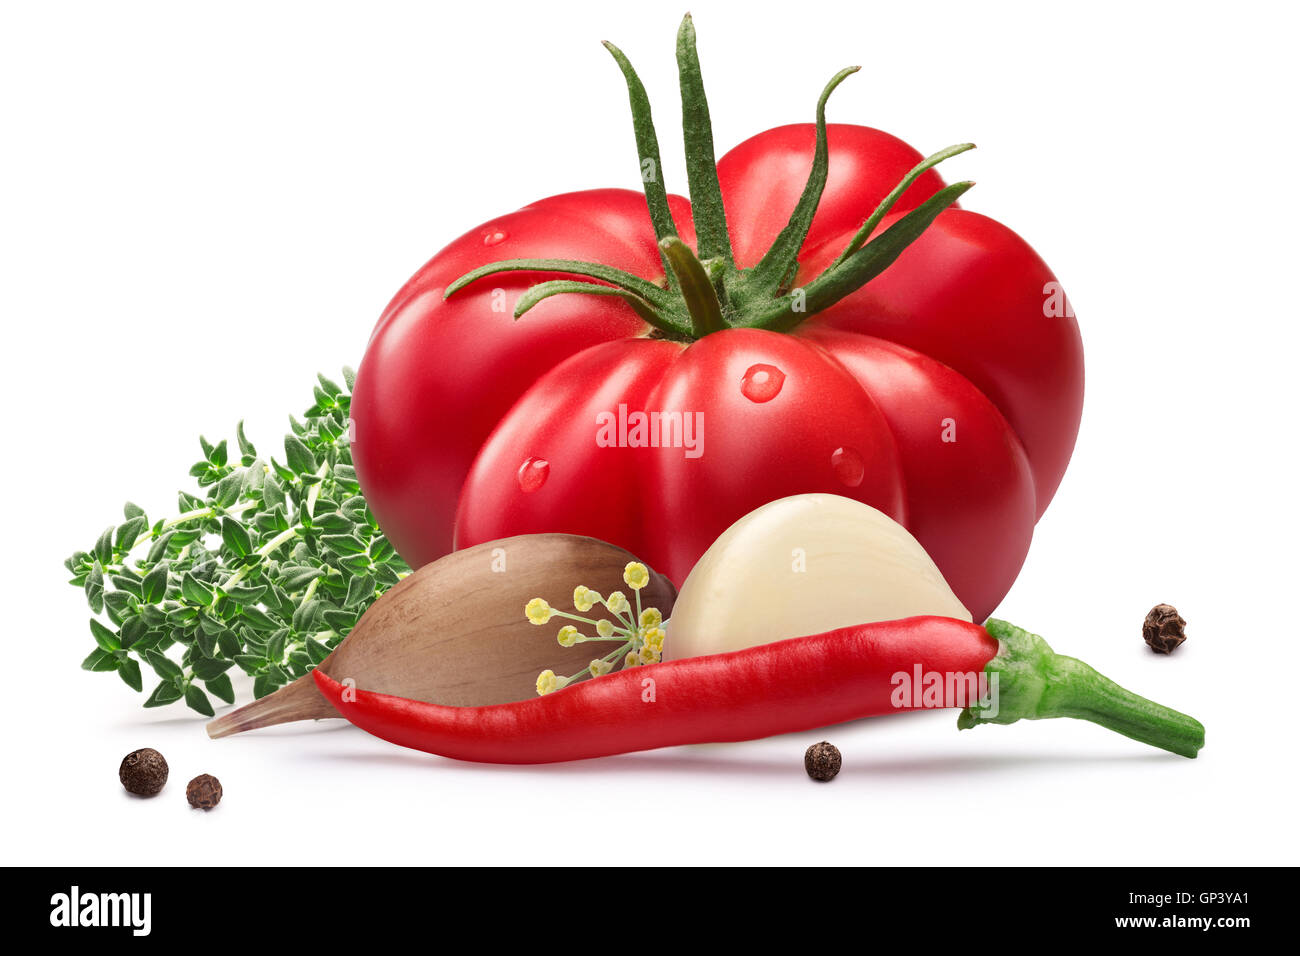 Fresh ribbed heirloom tomato for pickling with herbs, chili peppers and garlic. Clipping path, shadow separated. Design elements Stock Photo